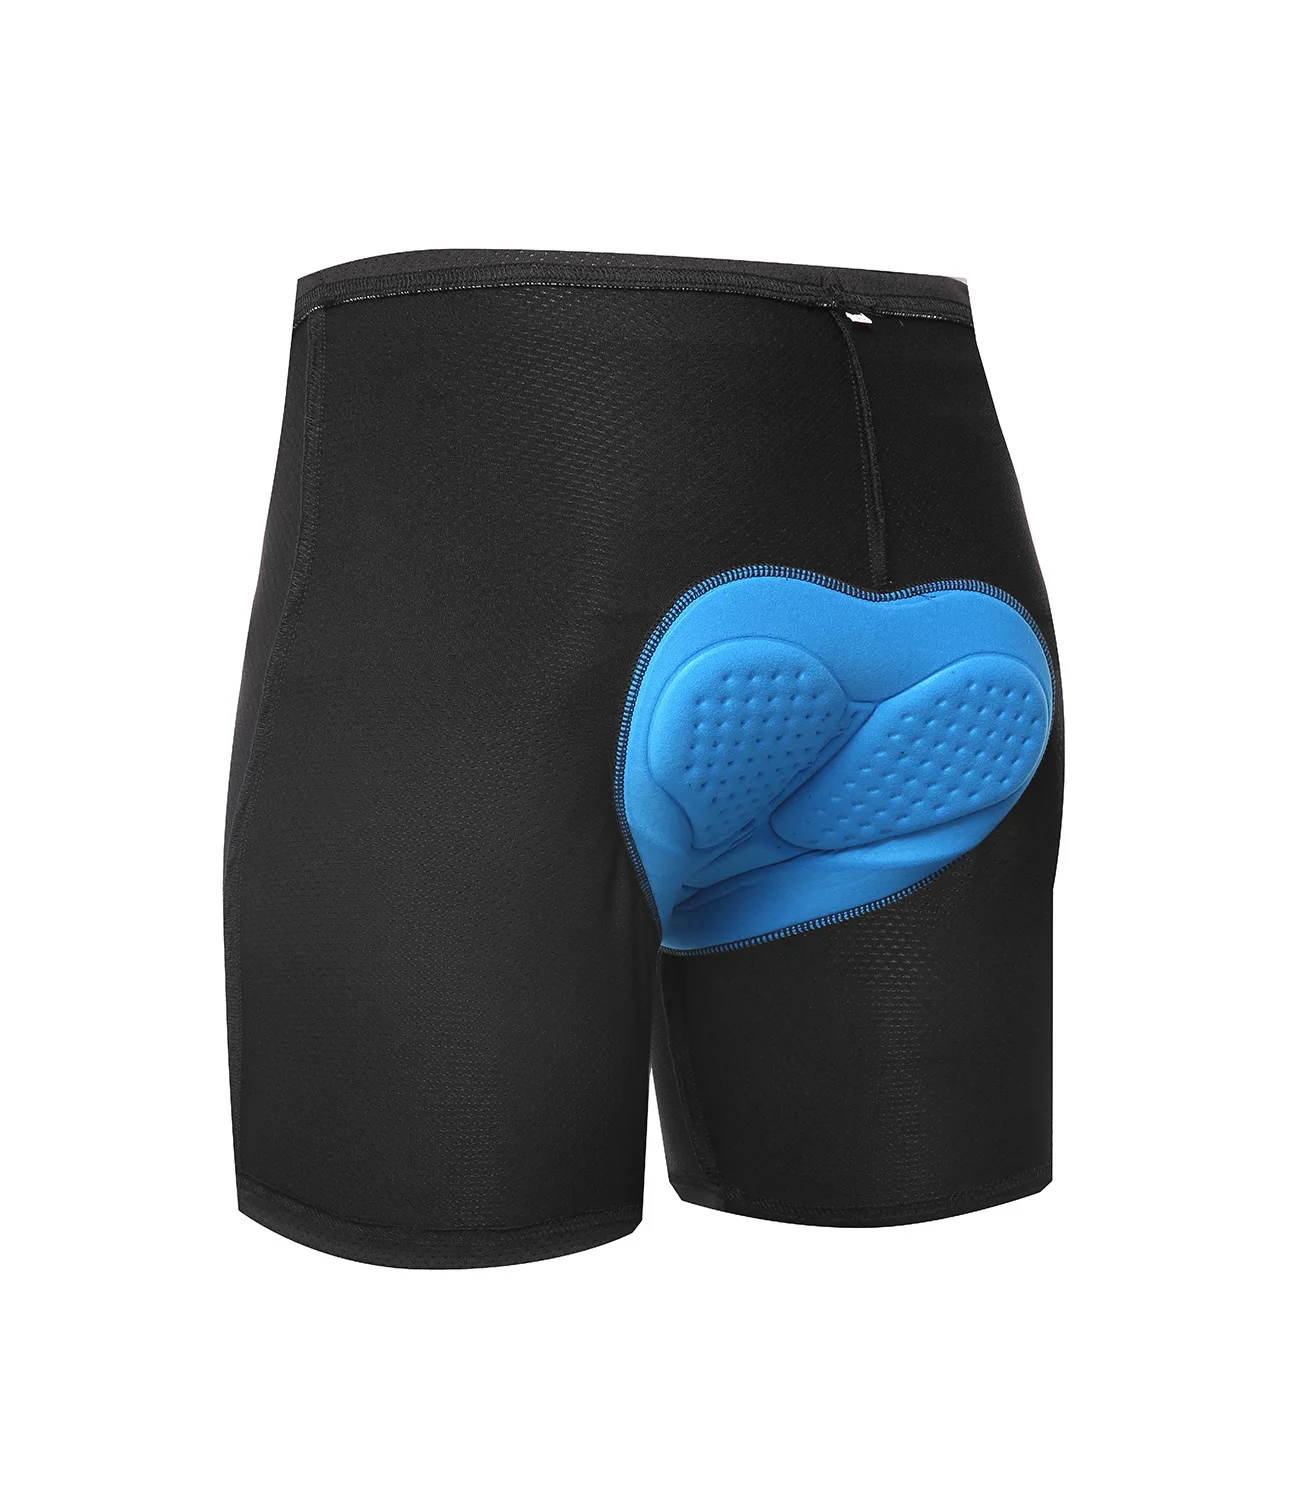 Men Bike Silicone Cycling Shorts Riding Underwear Quick Dry Breathable Type New 